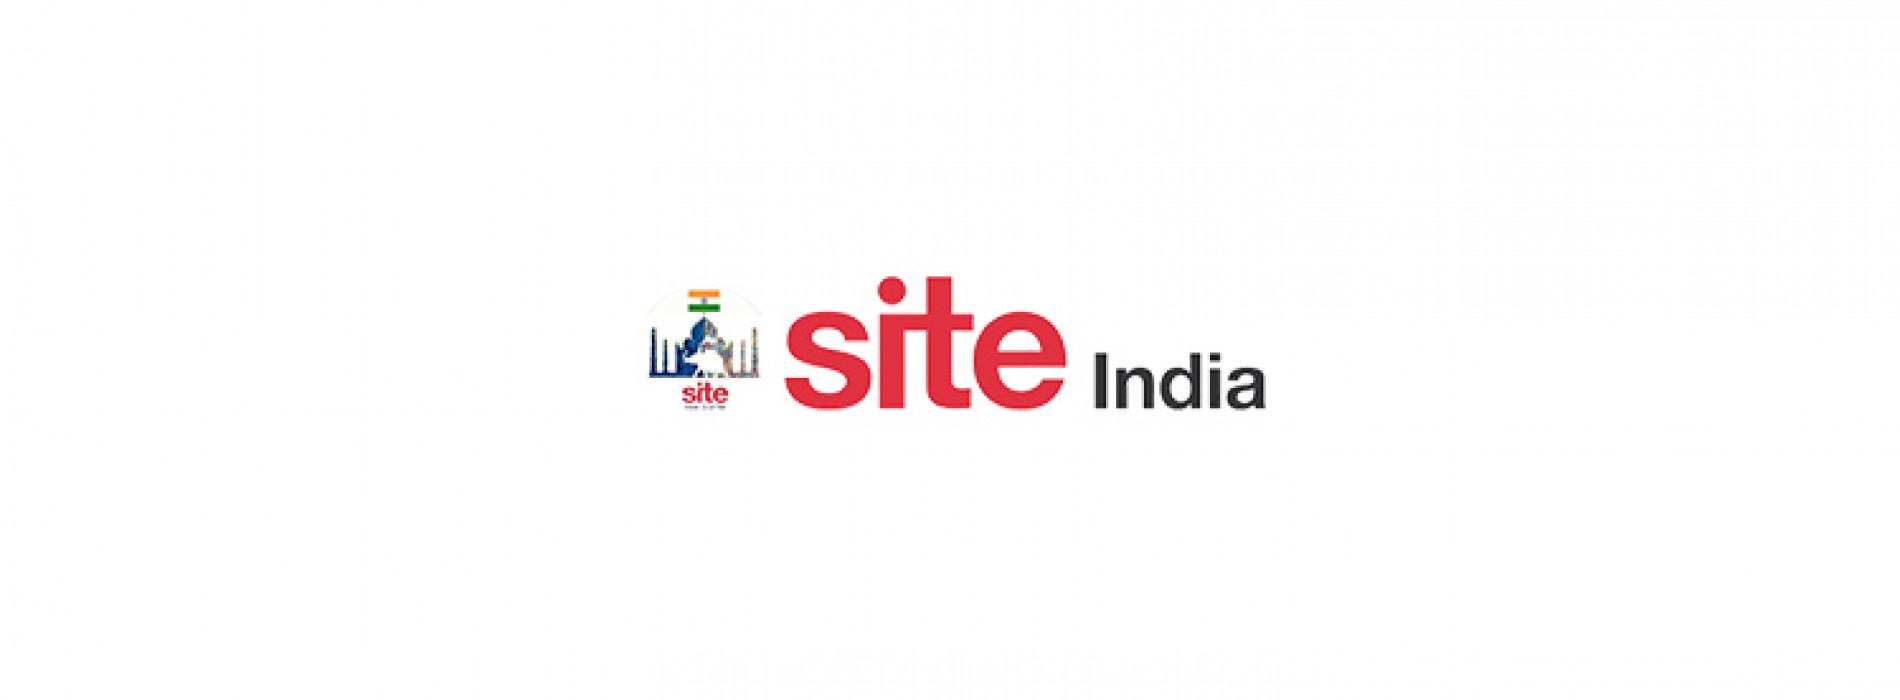 SITE Global- India chapter appoints Barun Gupta as President